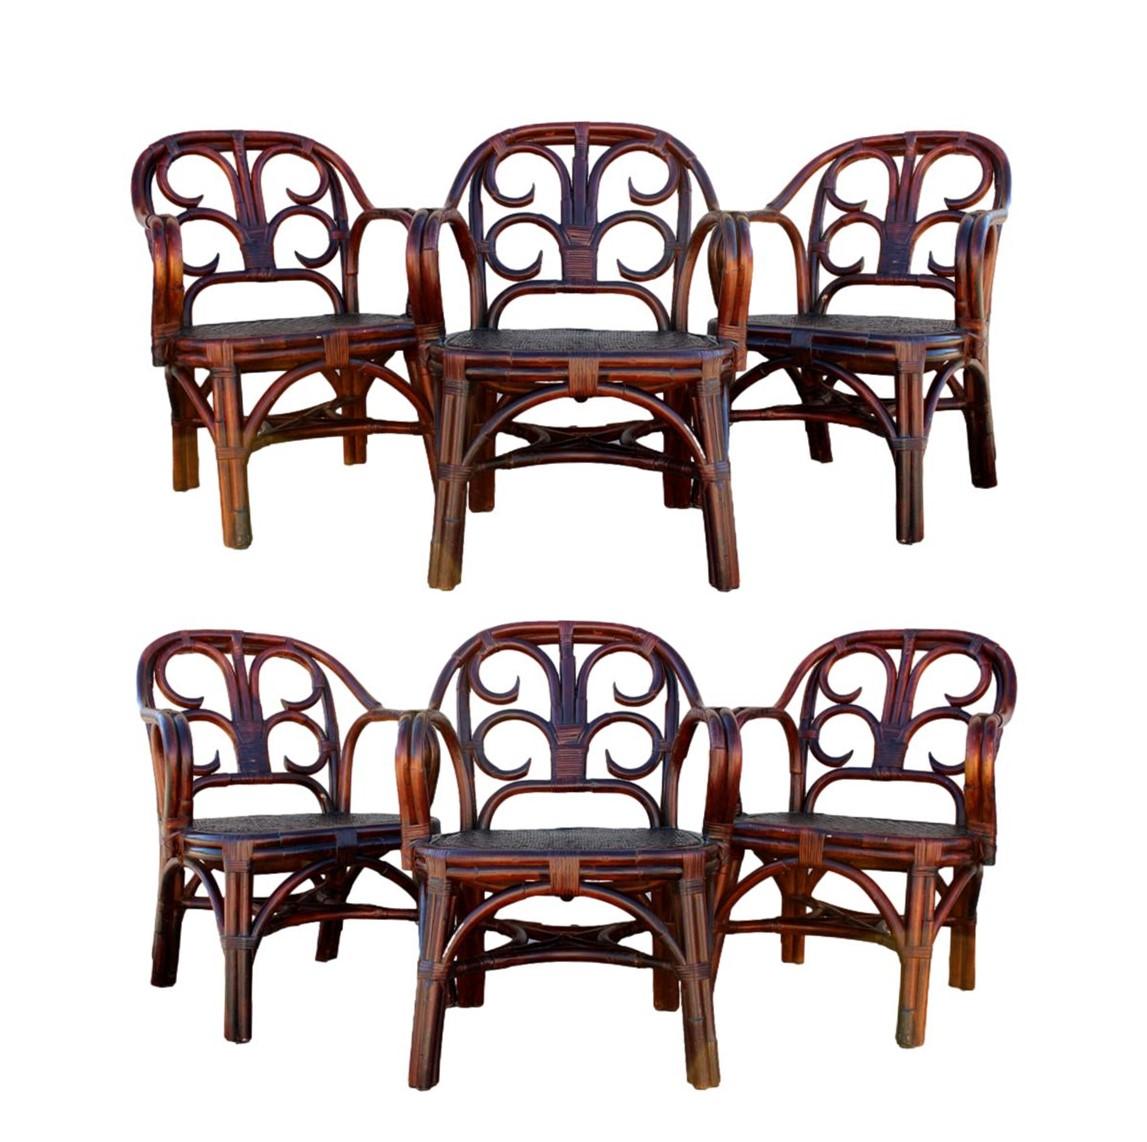 Elevate your dining experience with this amazing set of handmade bent rattan armchairs from Ralph Lauren. Beautiful and unique, the set of six vintage dining chairs retains the original rich mahogany finish. A dining table from the same collection